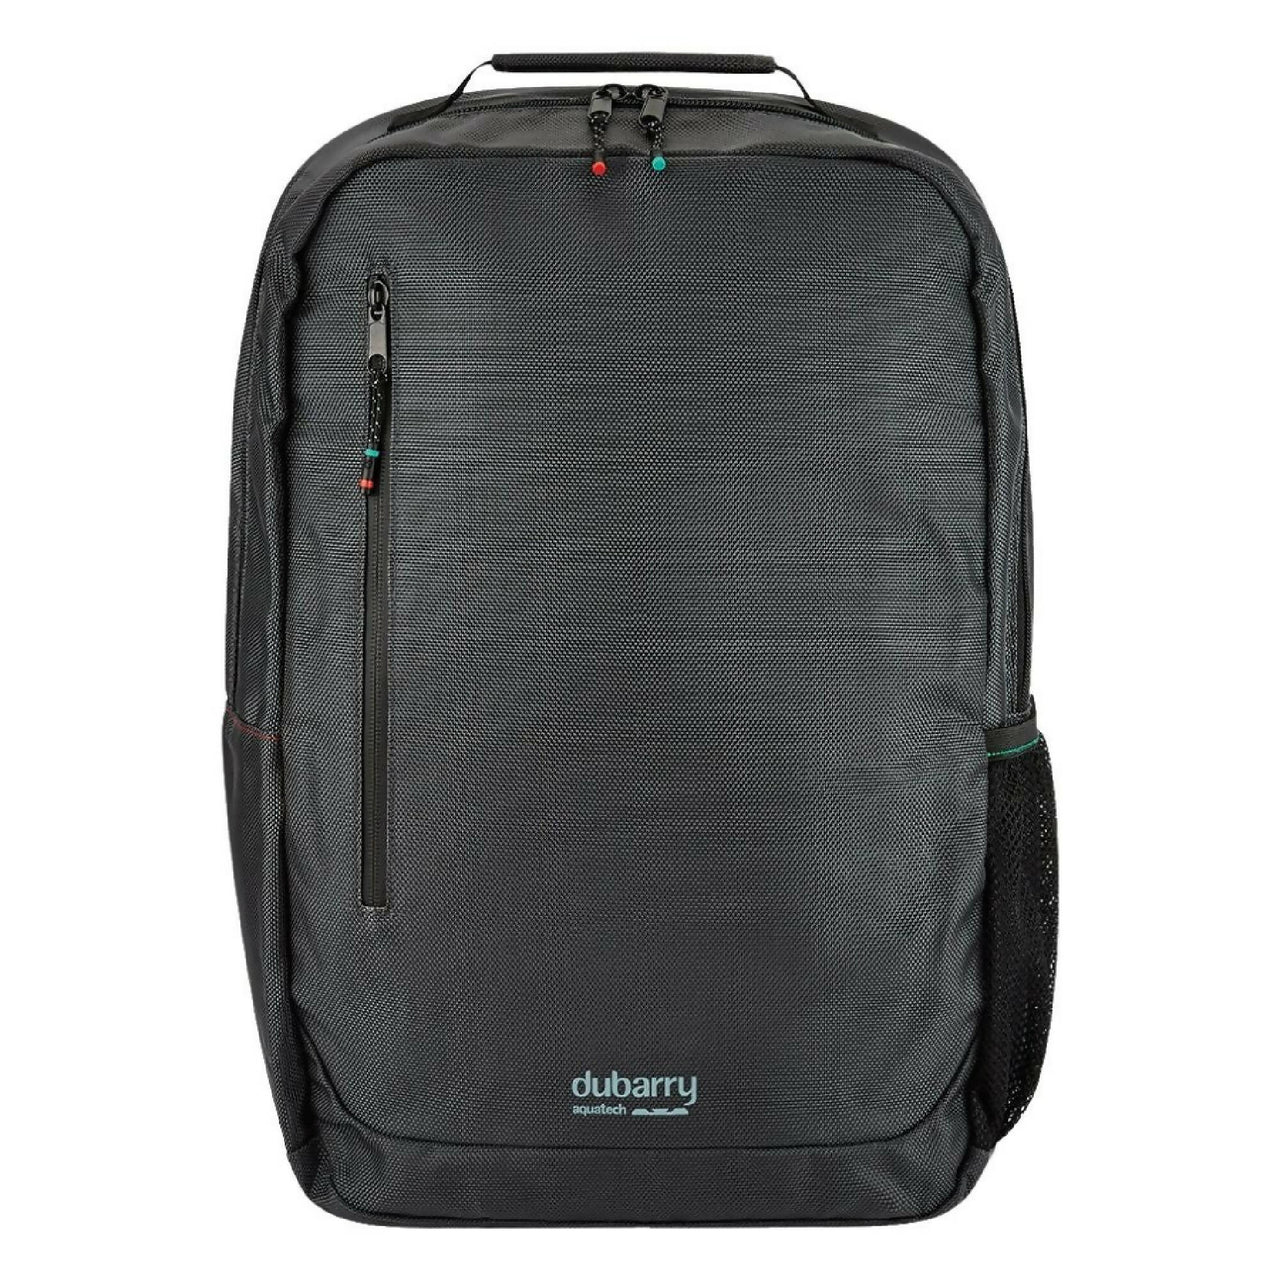 DUBARRY Naples 25L Backpack GRAPHITE (Online only*)